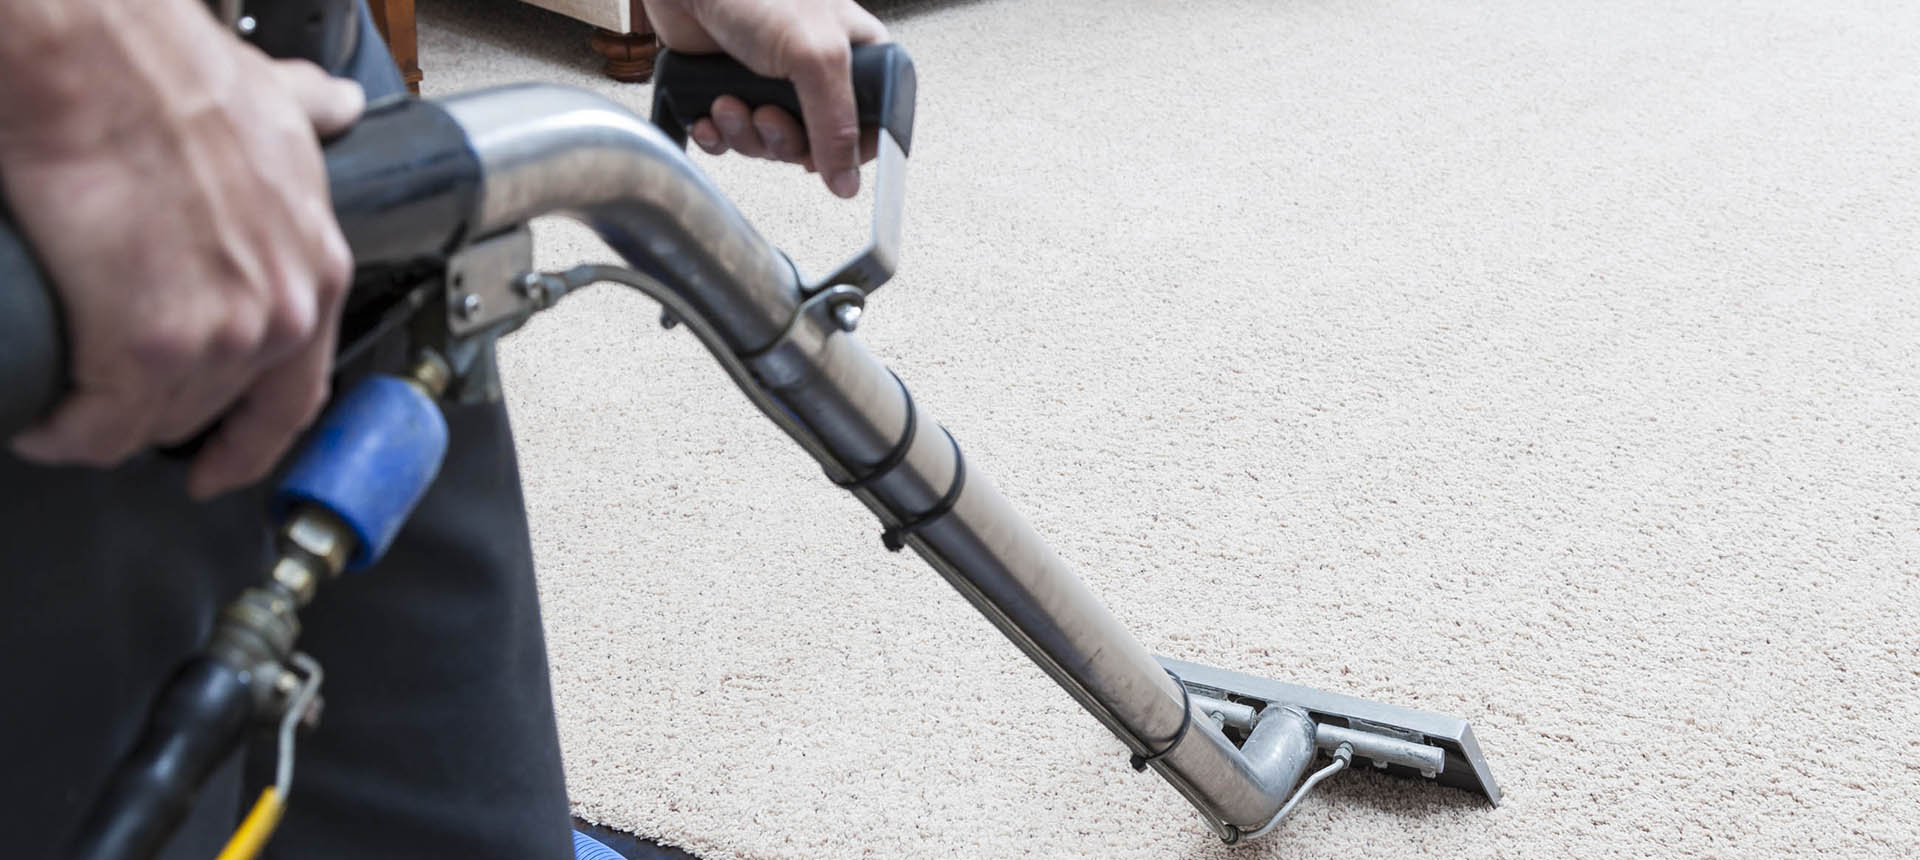 carpet cleaning service ma